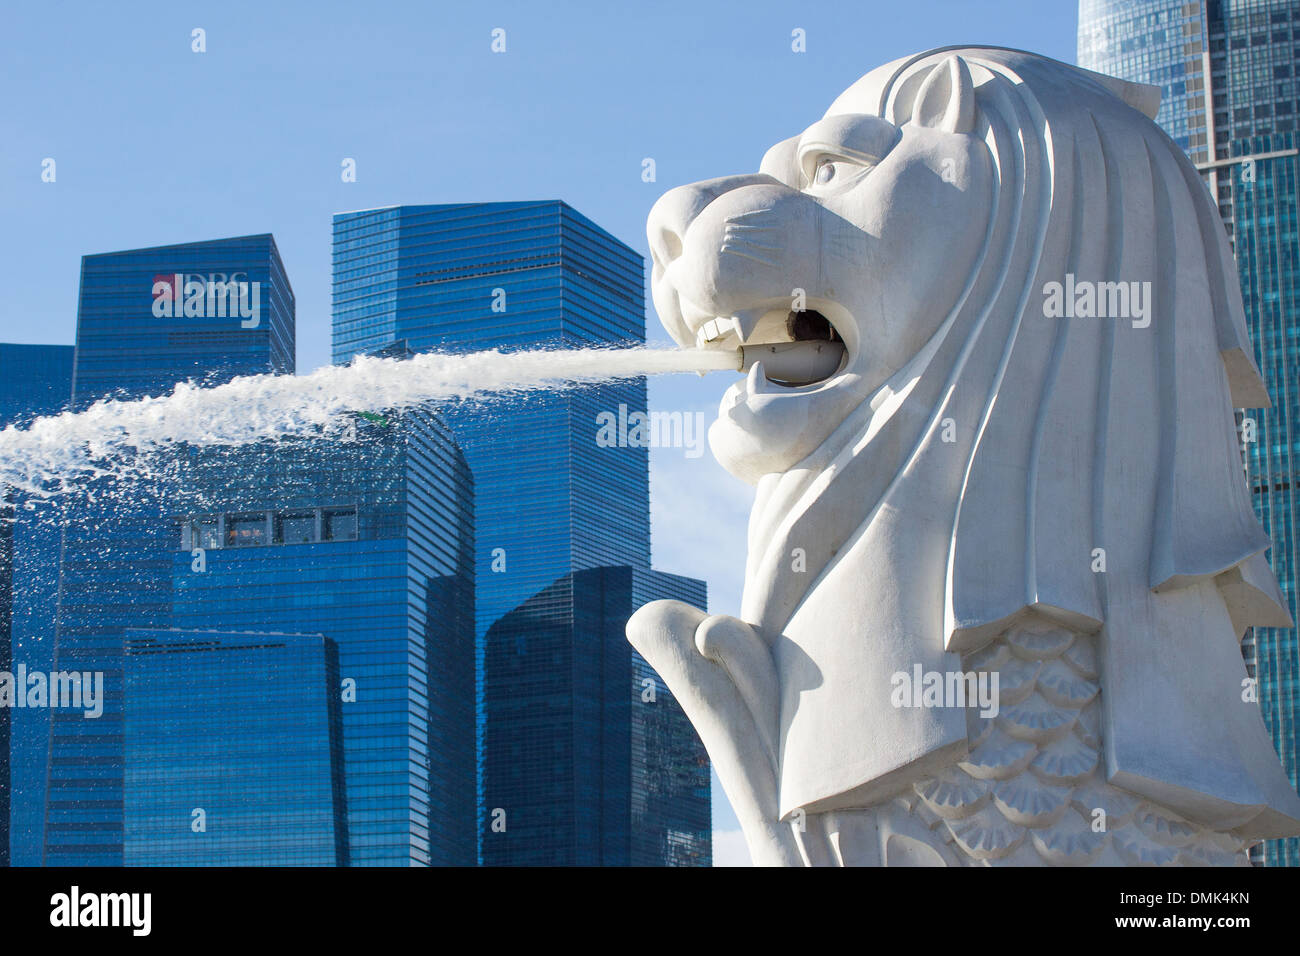 THE SCULPTURE MERLION, SYMBOLISING SINGAPORE, AT THE FOOT OF THE OFFICE BUILDINGS IN THE FINANCIAL DISTRICT, CENTRAL BUSINESS DISTRICT, SINGAPORE Stock Photo